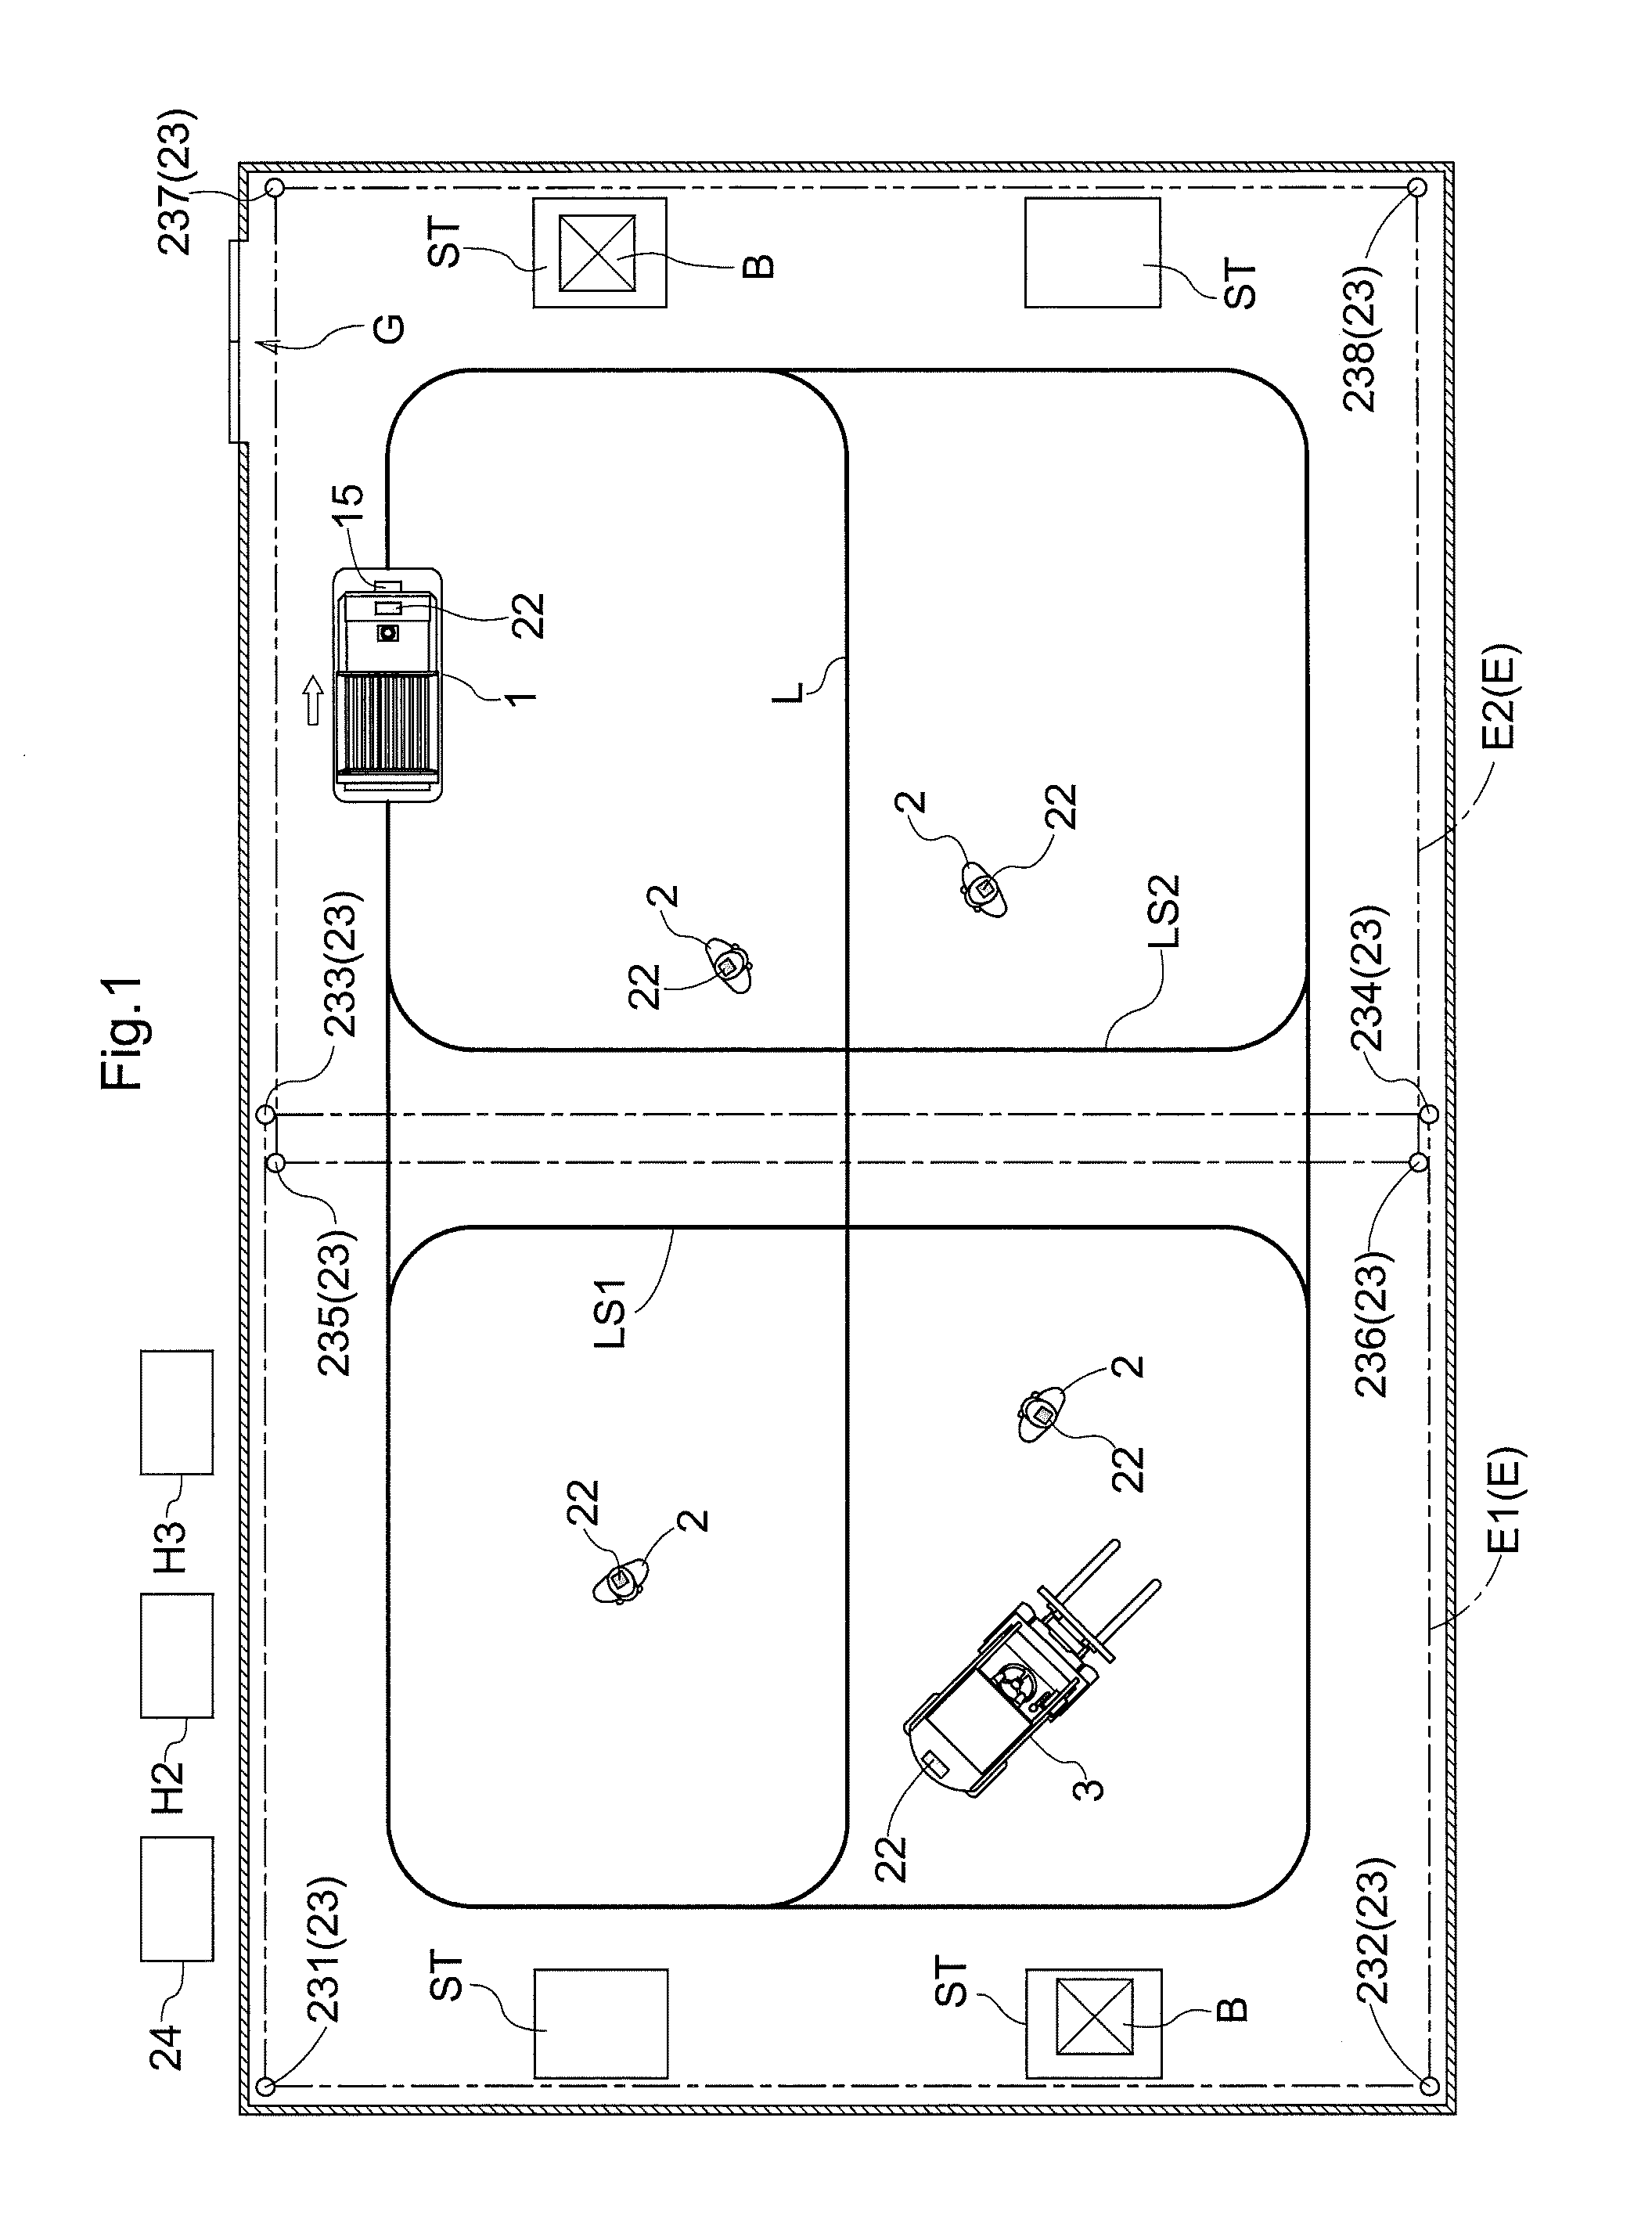 Vehicle control system and vehicle control method